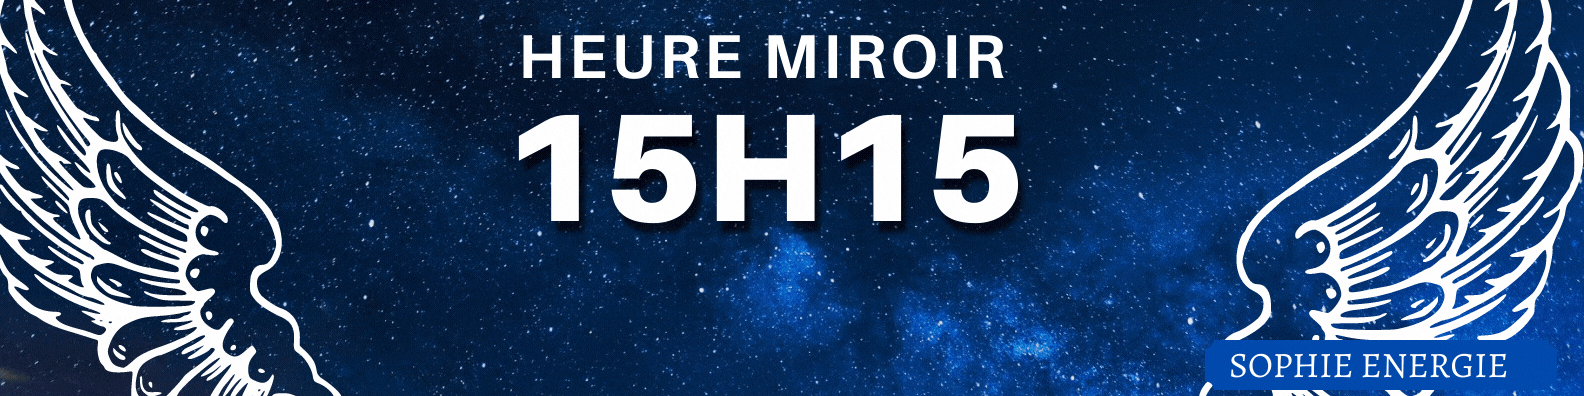 HEURE MIROIR anges 15h15